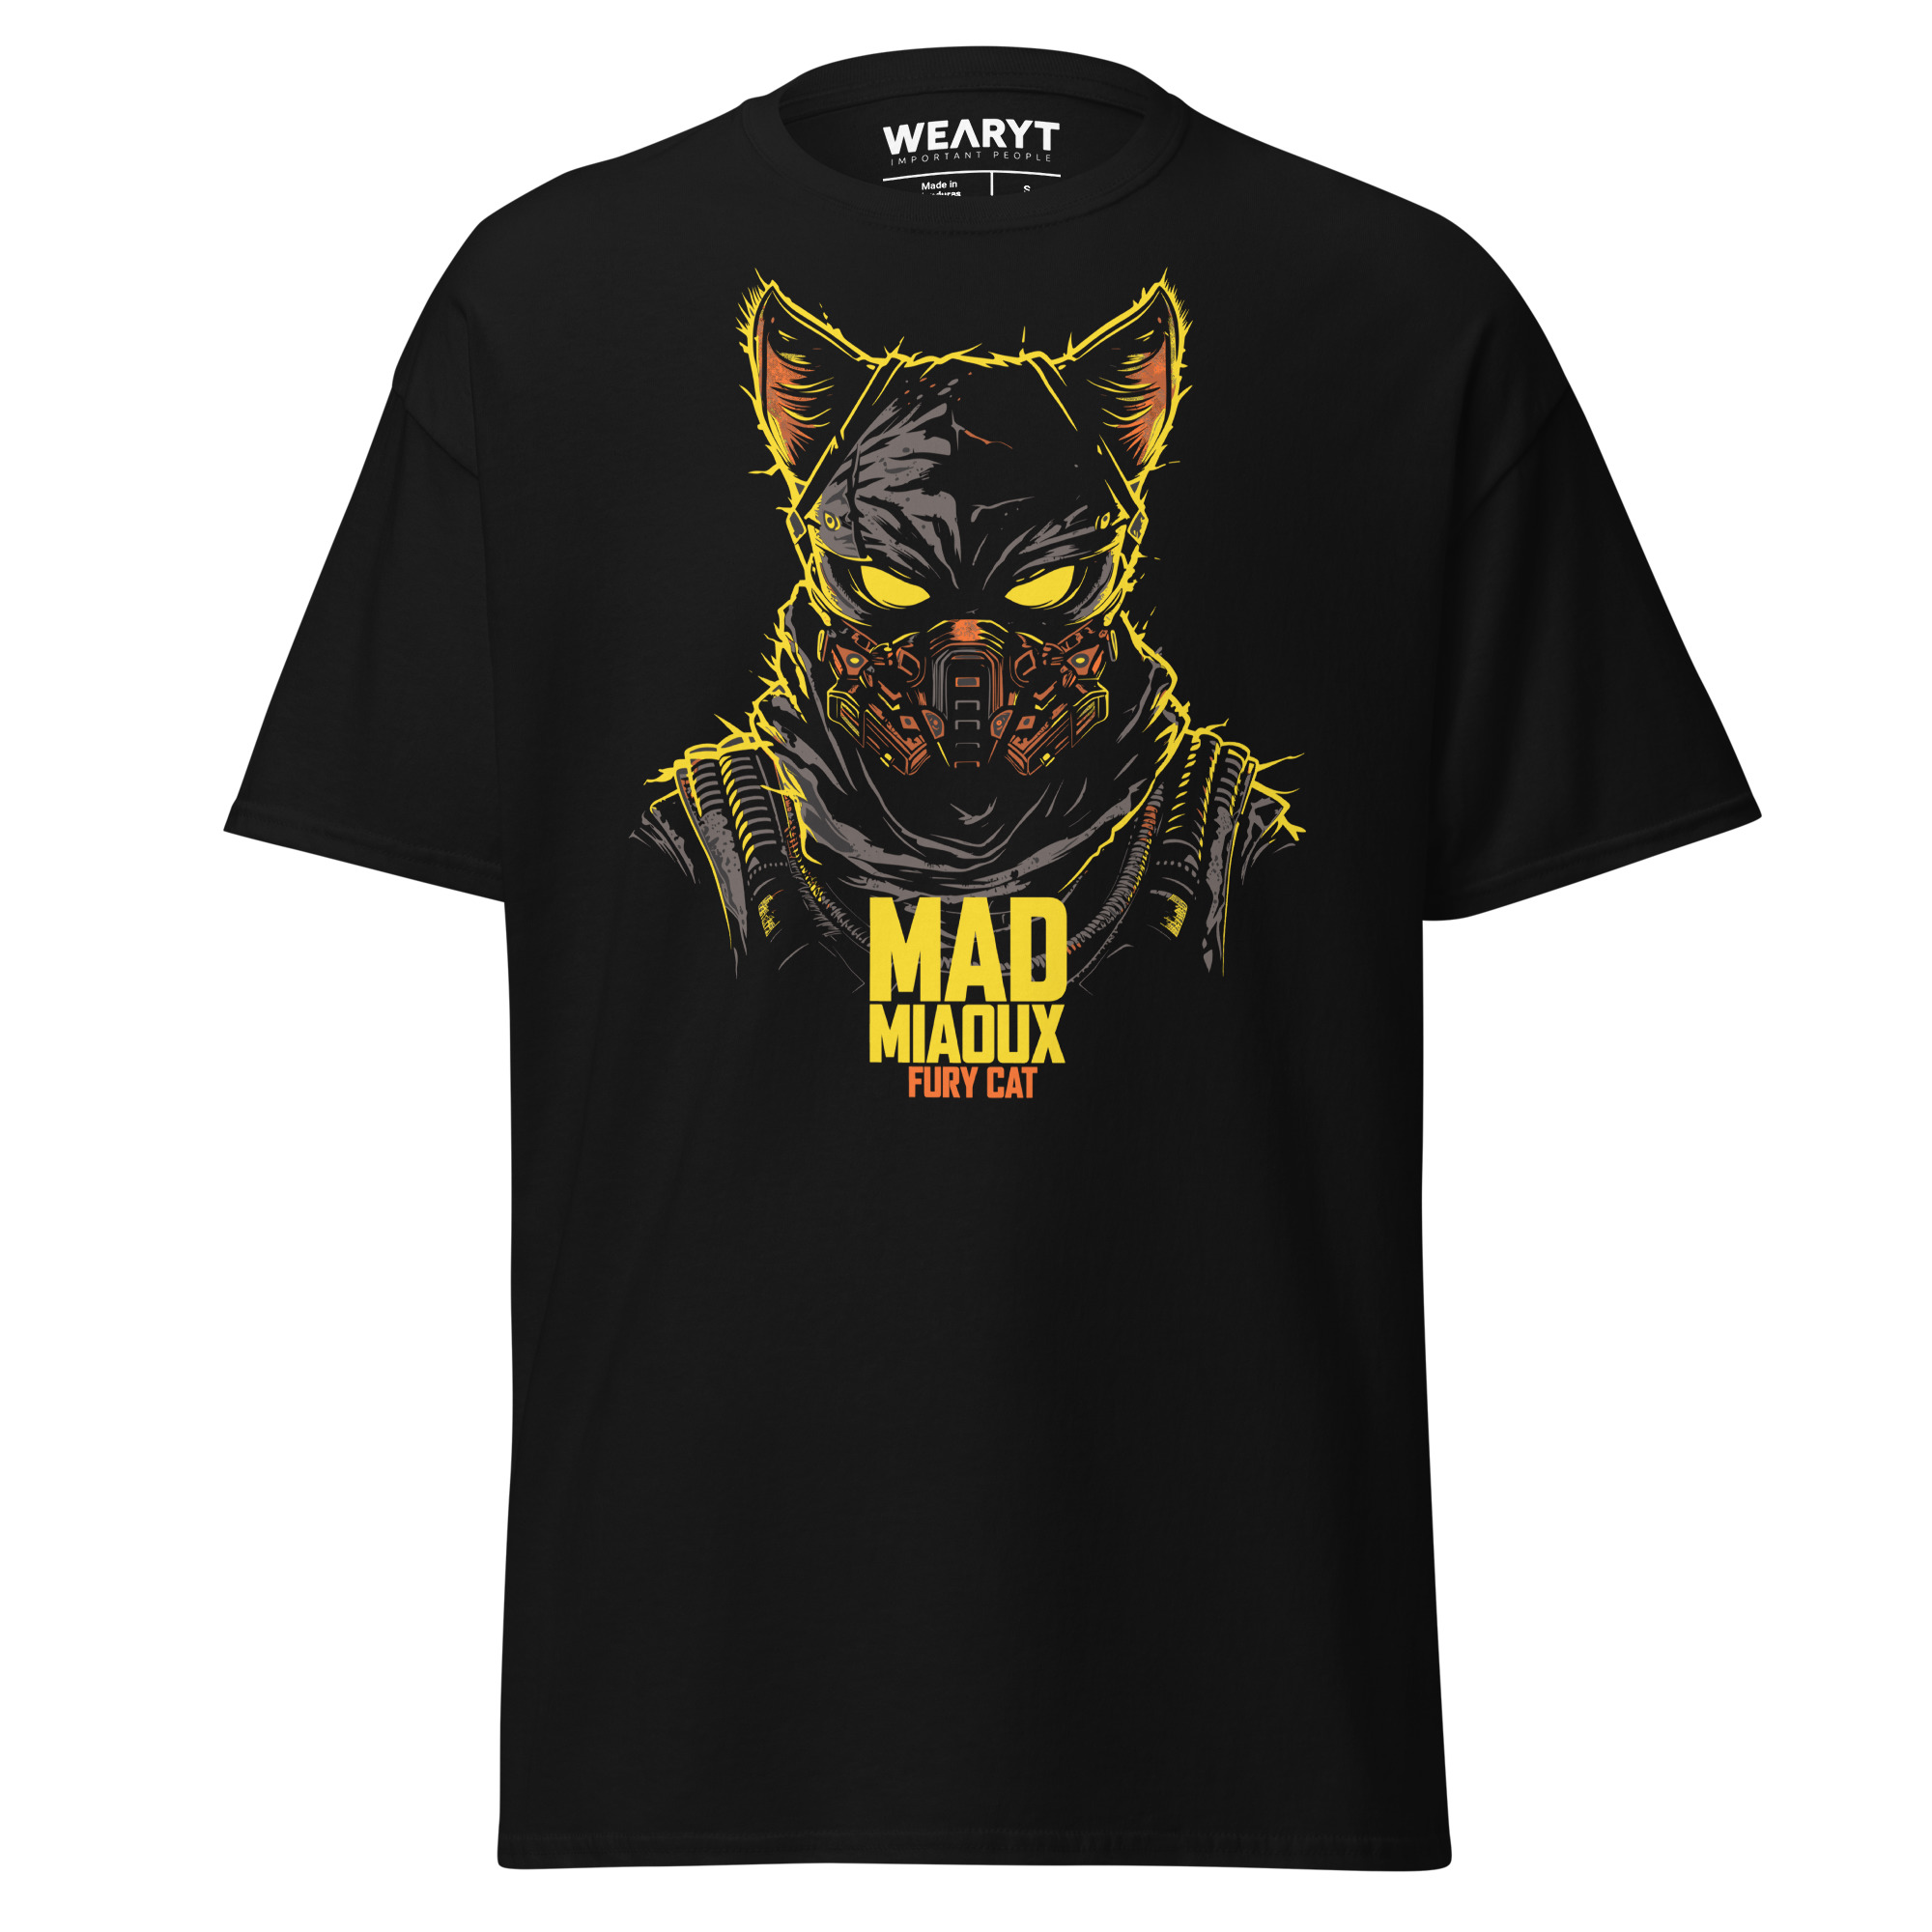 T-shirt – Film – Mad Miaoux – Fury Cat Men's Clothing Wearyt